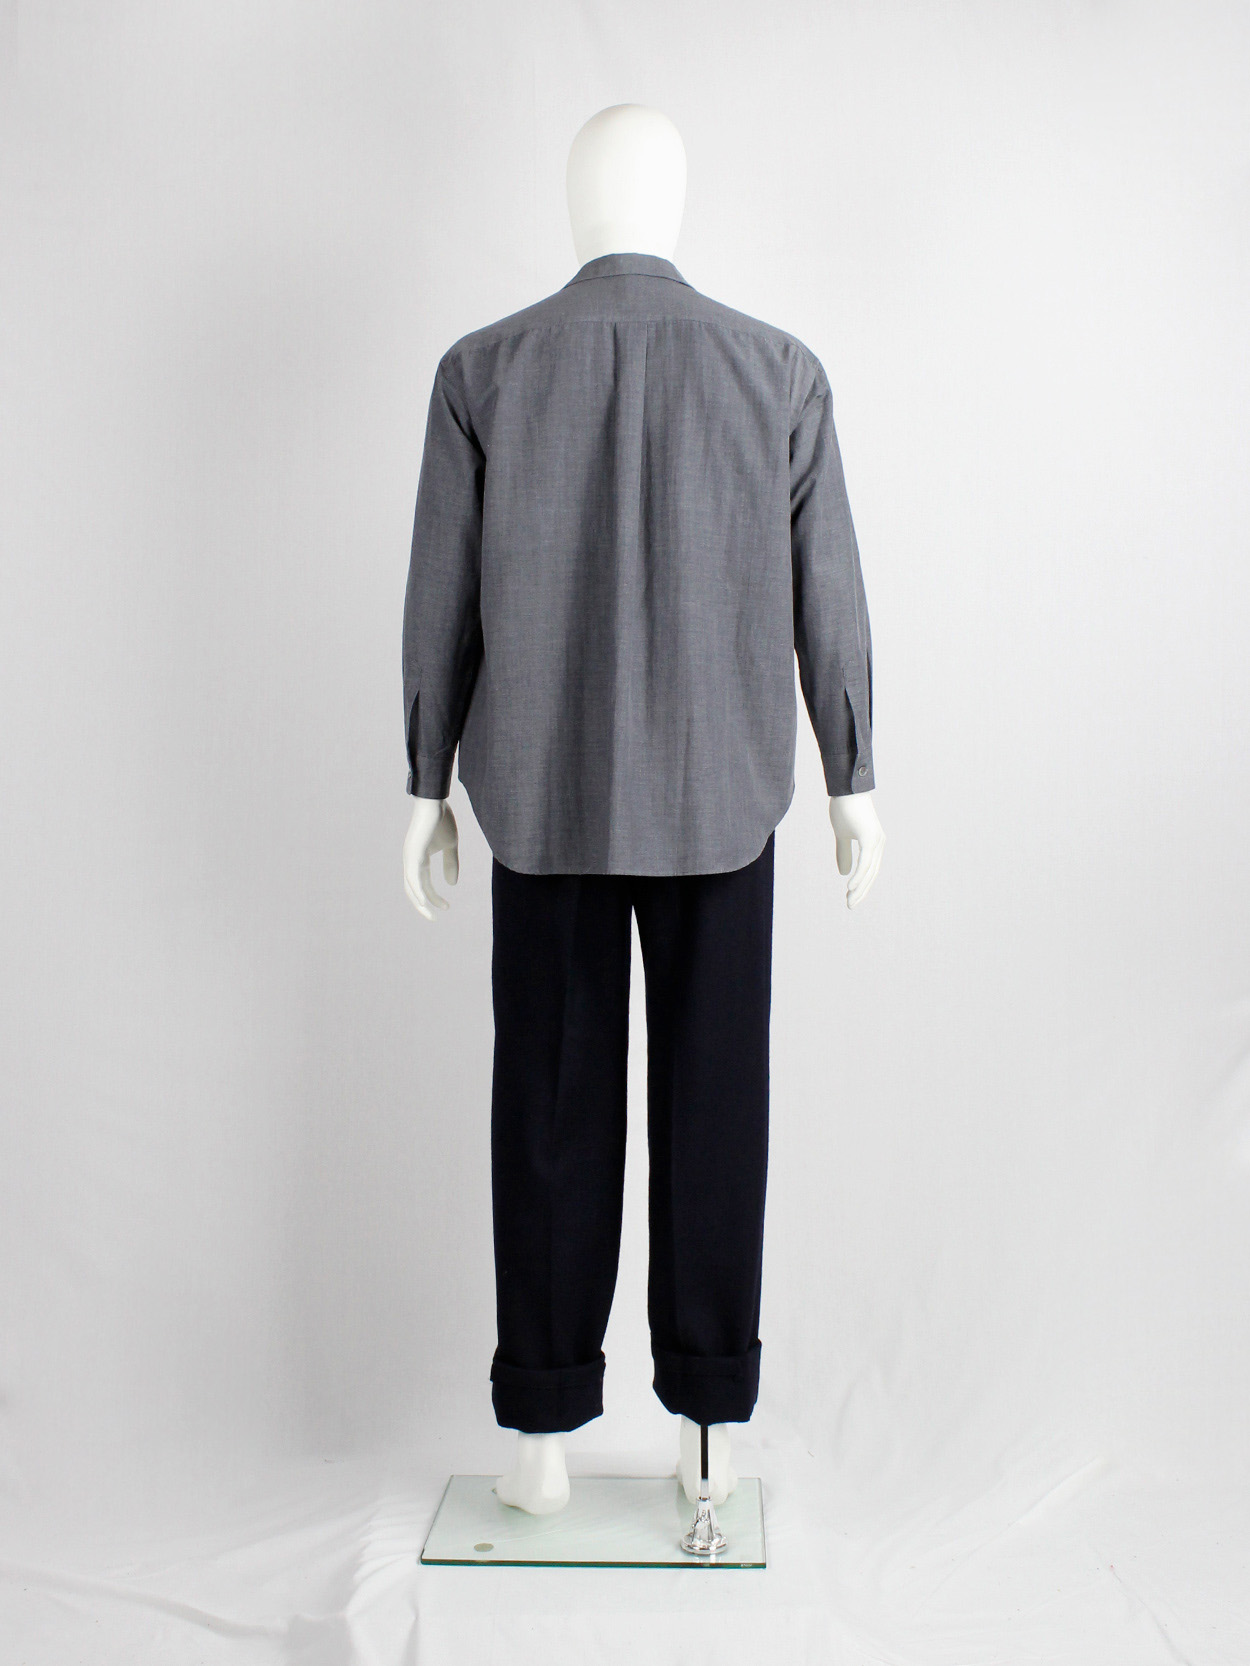 Pour Deux grey shirt with rectangle flaps across the chest (12)